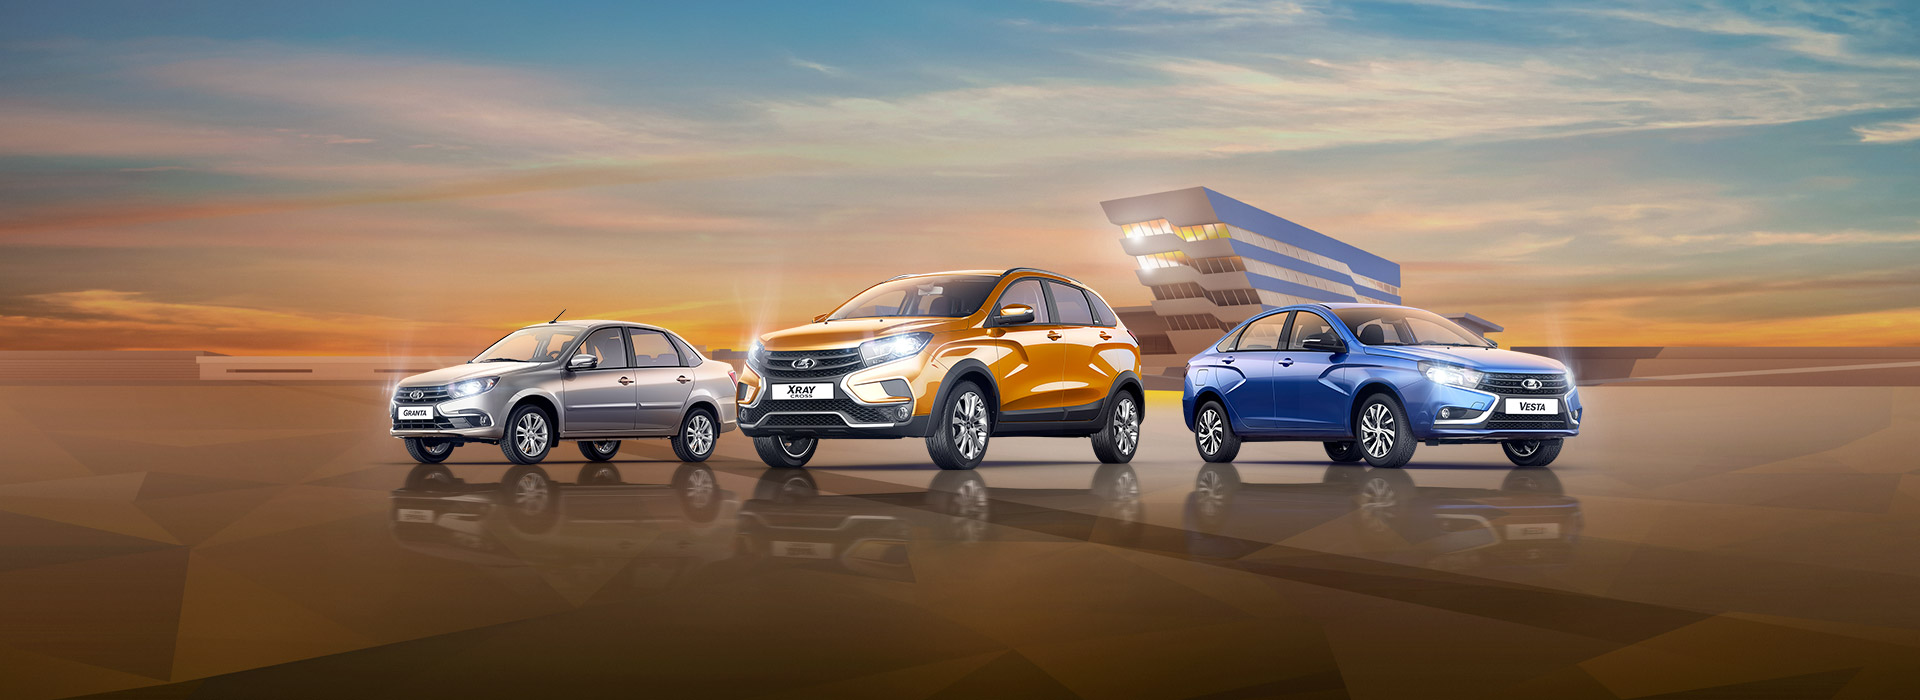 Stay up to the latest
 LADA news